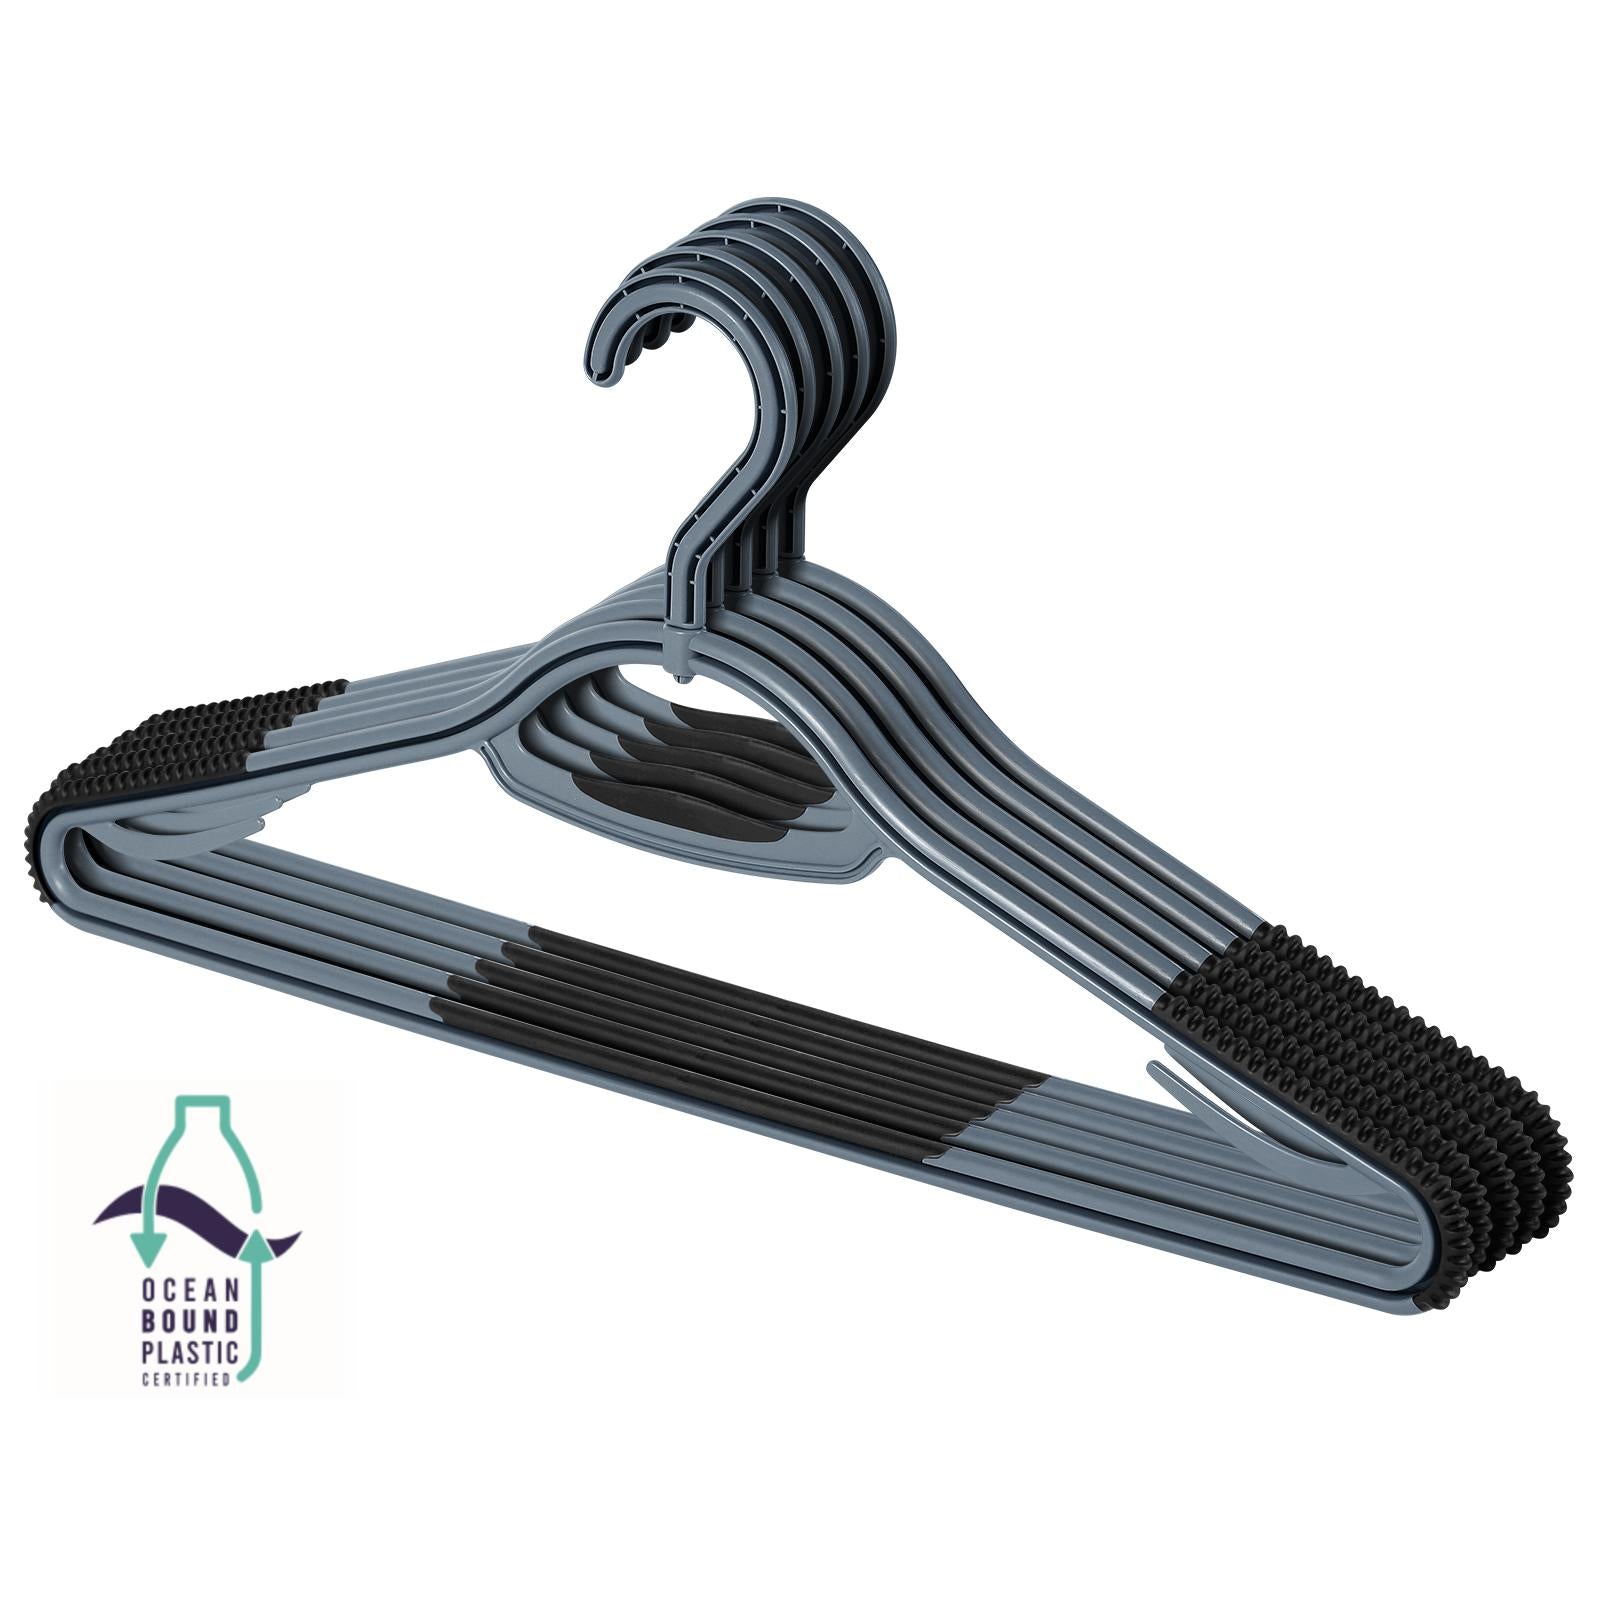 Clothes Hangers Plastic 20 Pack - Black Plastic Hangers - Makes The Perfect  Coat Hanger and General Space Saving Clothes Hangers for Closet 